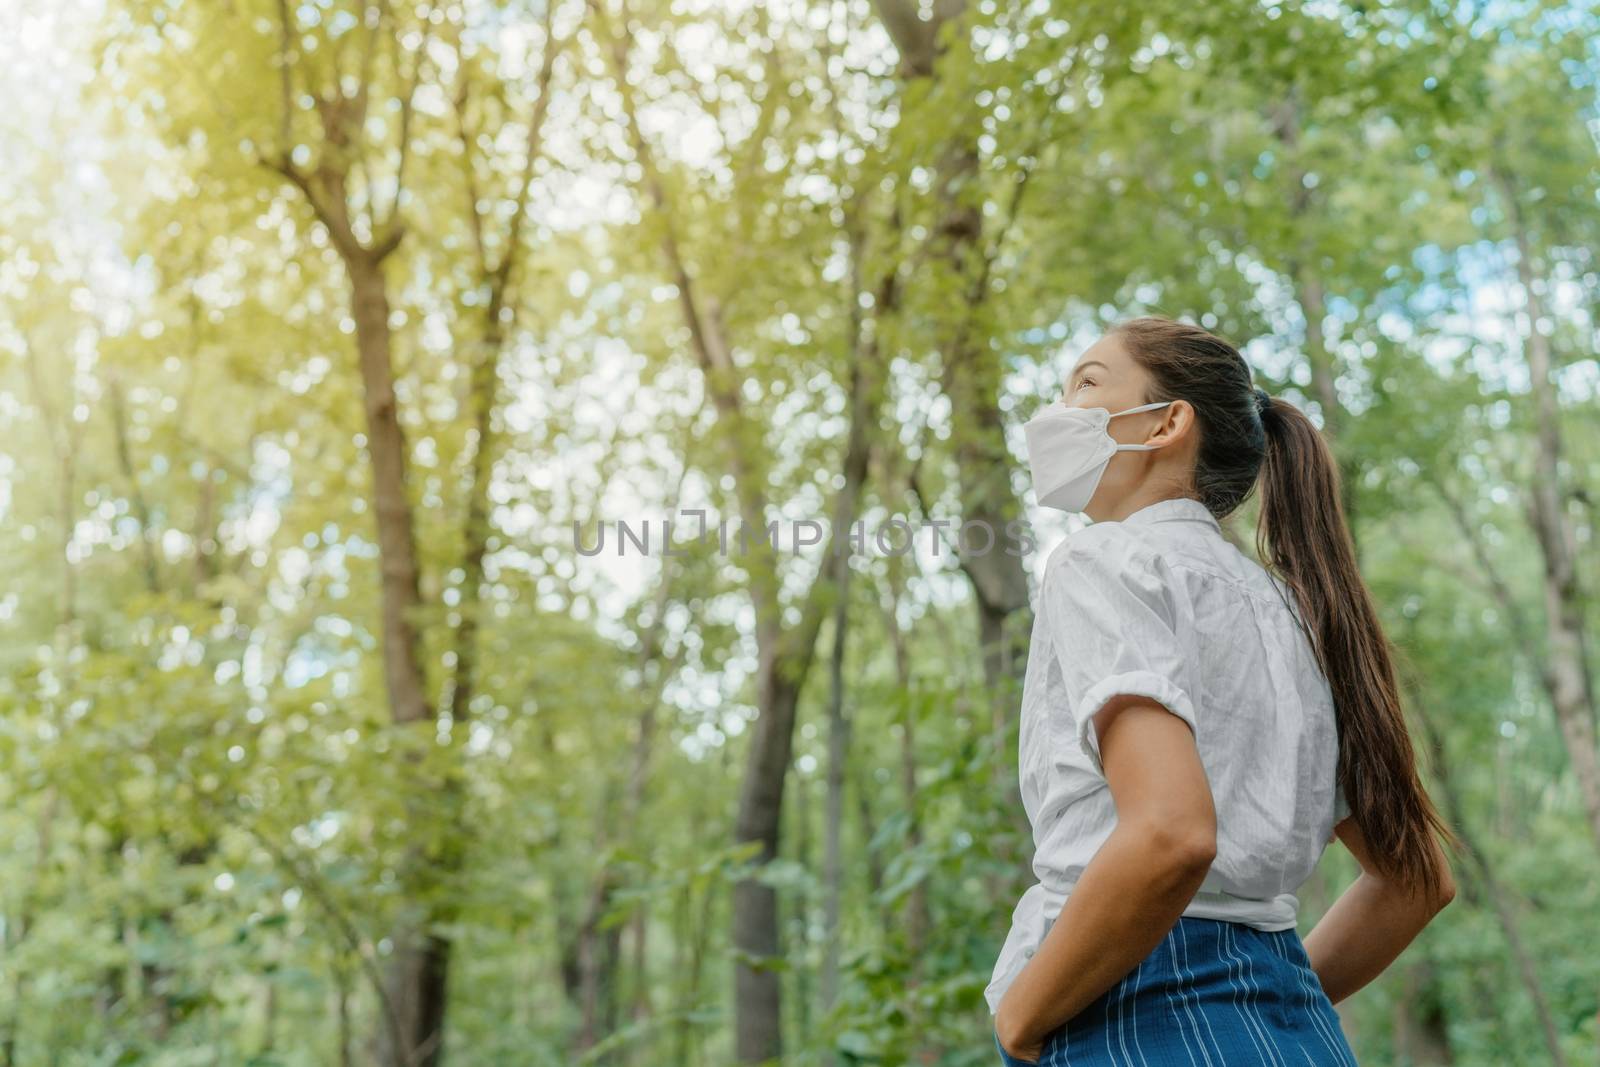 Eco-friendly sustainable face mask. Woman wearing kn95 korean masks walking in outdoor forest lookin up at sunlight. Hope concept for environment. Coronavirus covering.